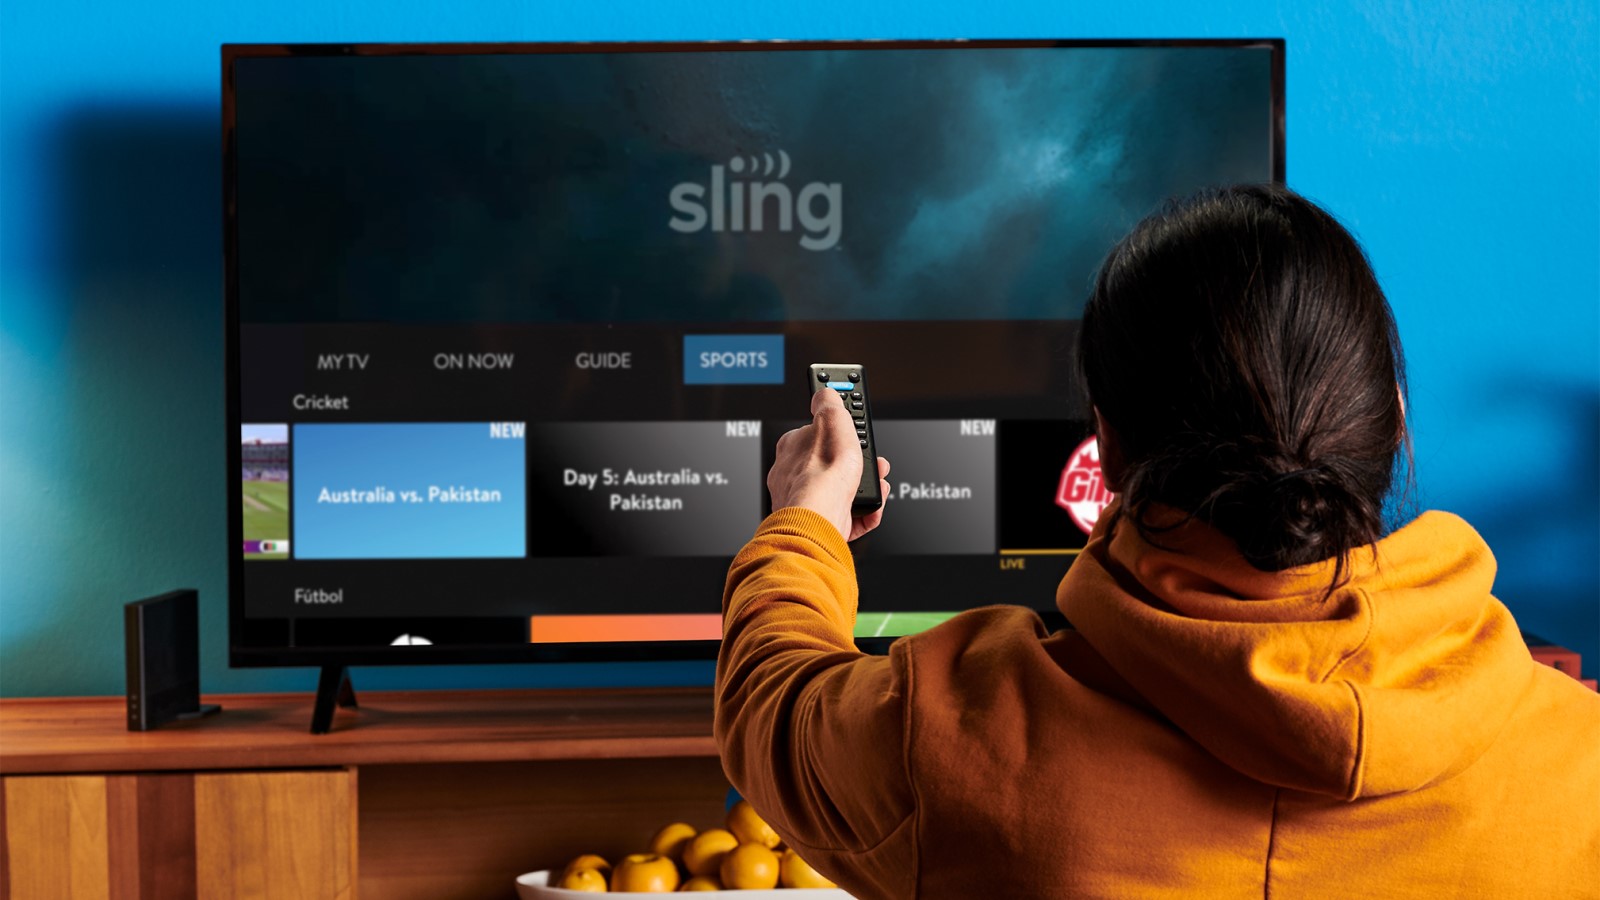 how to use skype on android tv box